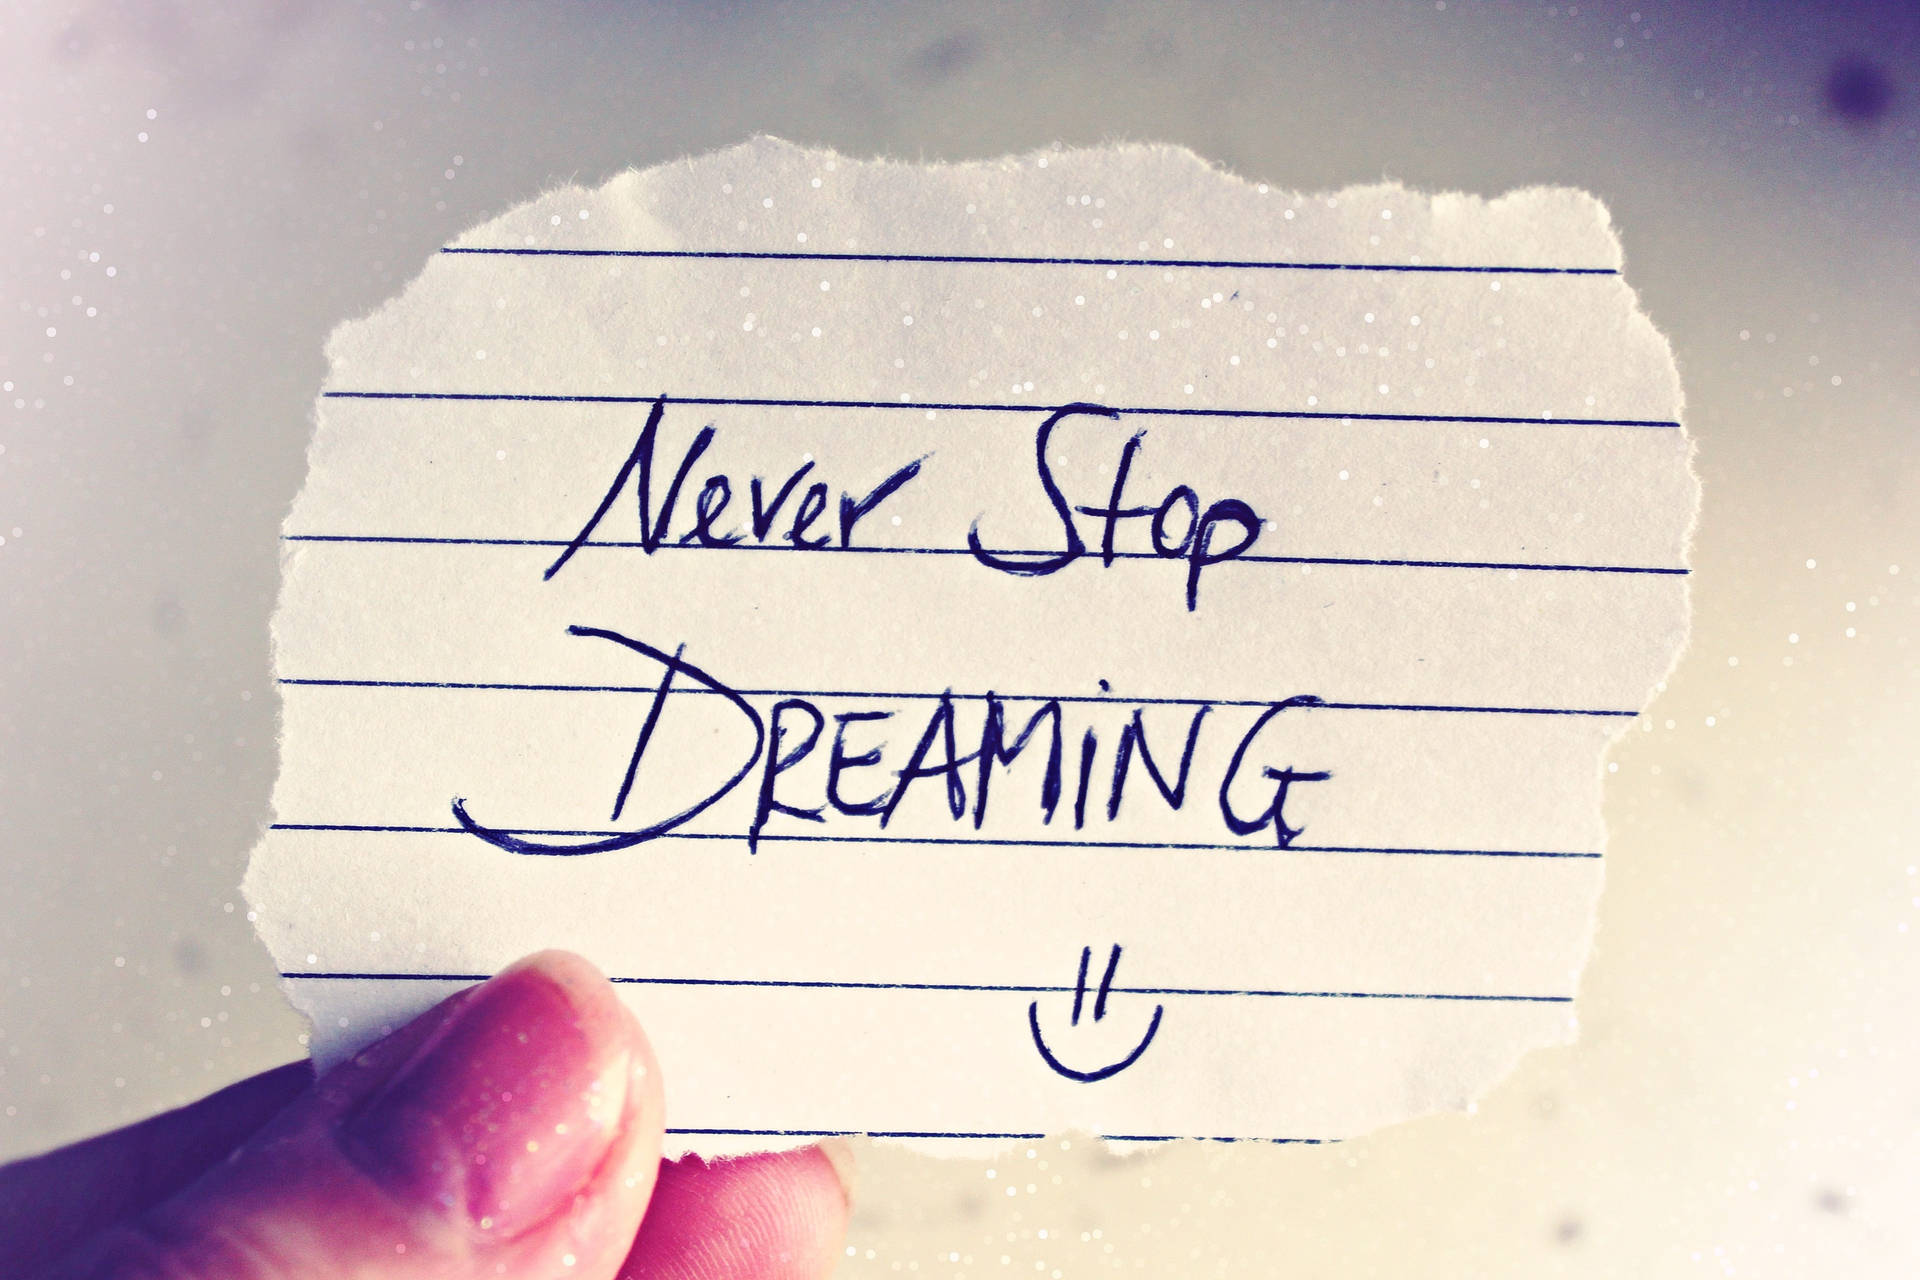 Never stop dreaming - Inspirational cute writing on a floral background Wallpaper